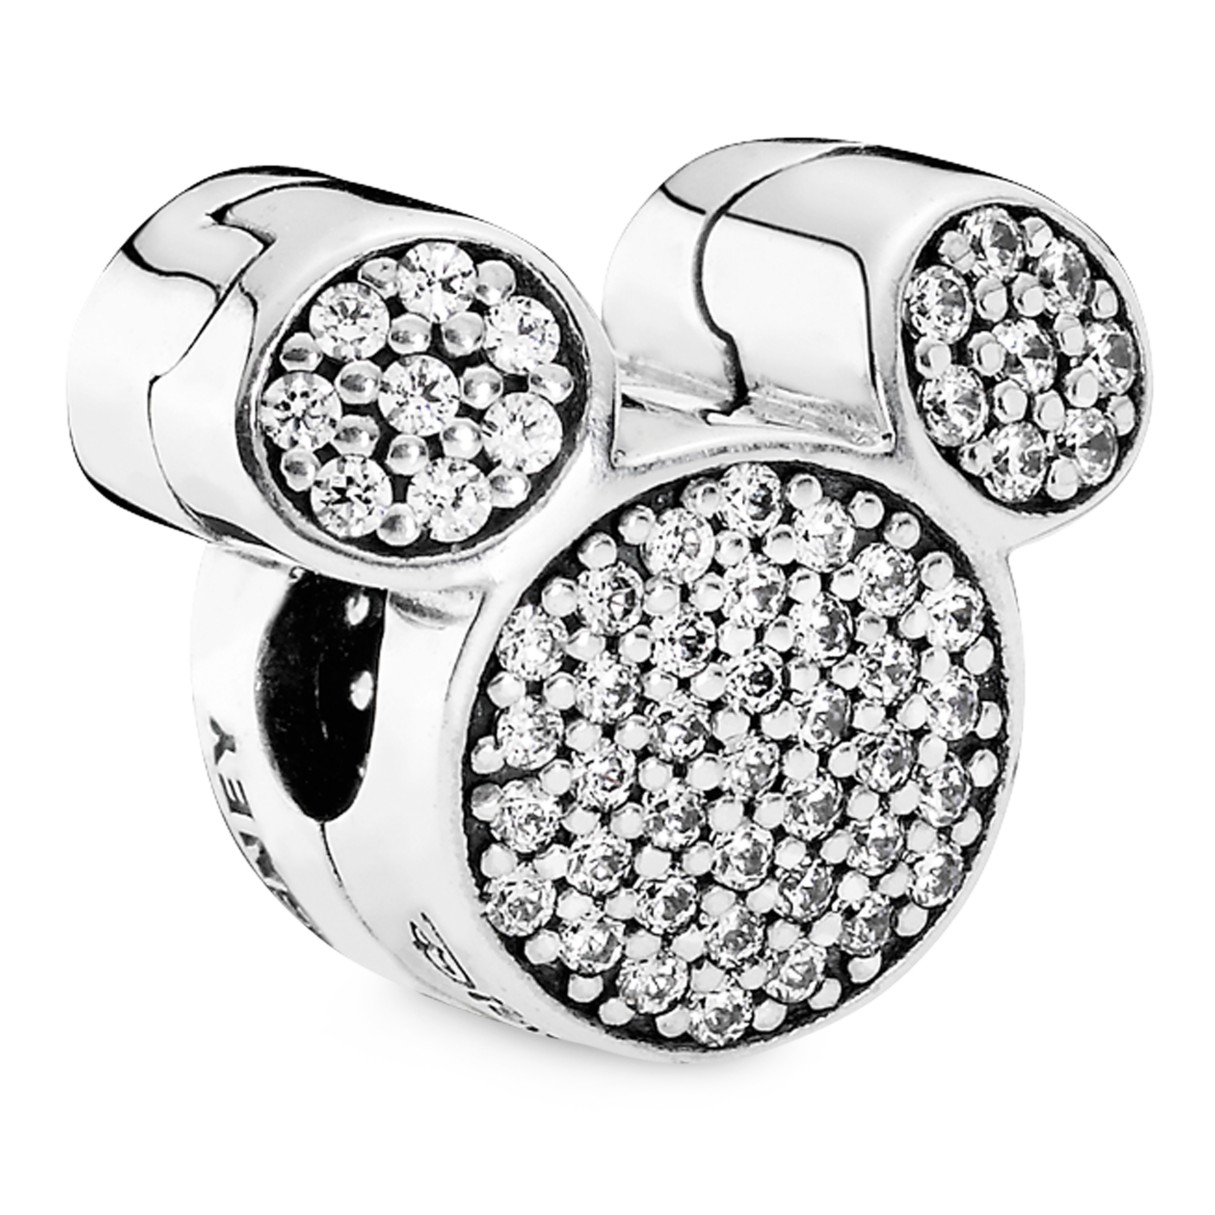 Mickey Mouse Ears Clip by Pandora Jewelry